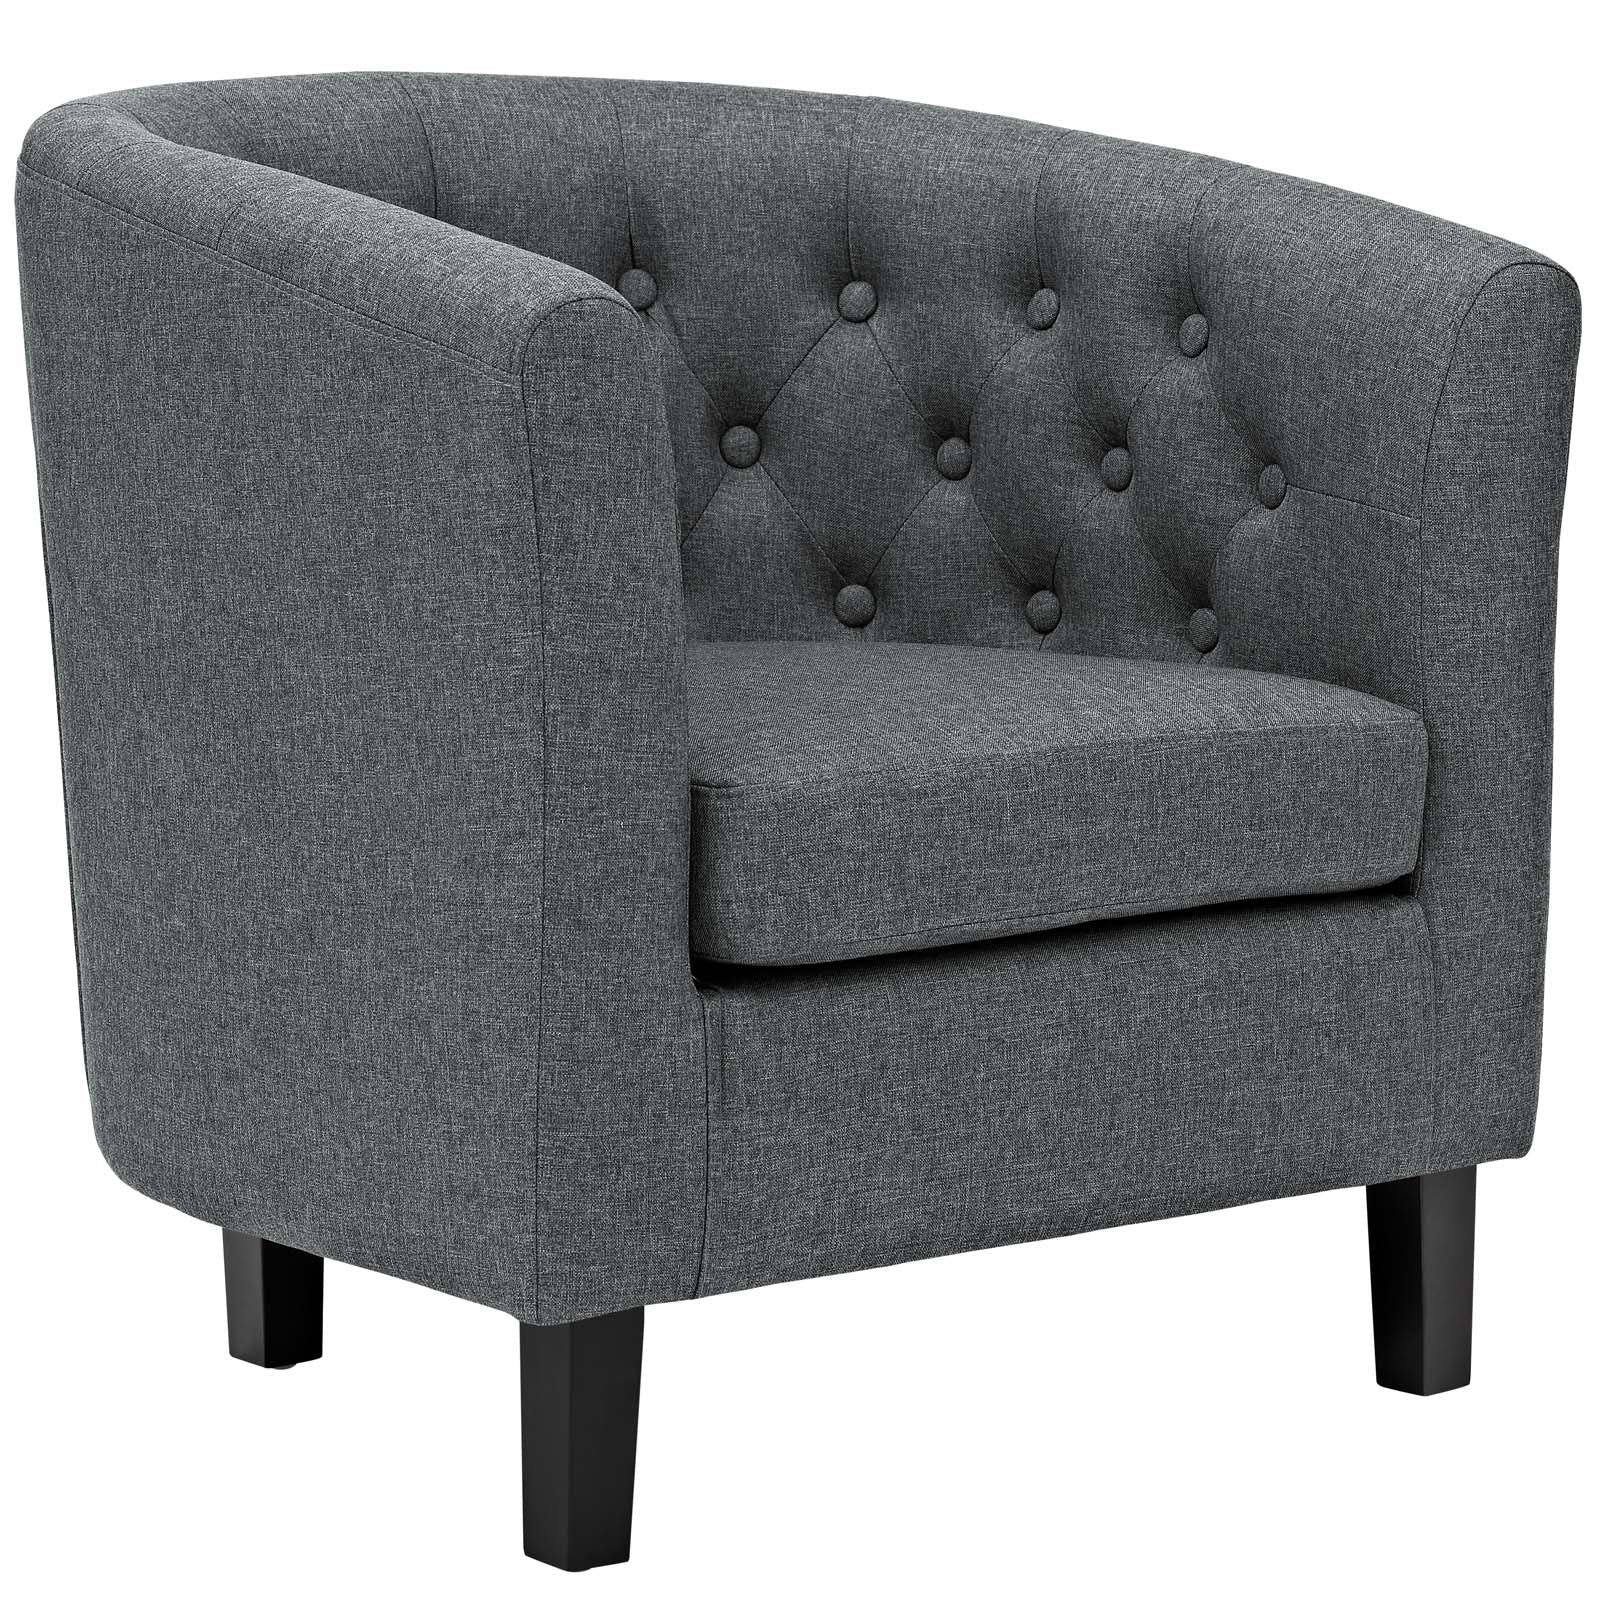 Modway Living Room Sets - Prospect 3 Piece Upholstered Fabric Loveseat and Armchair Set Gray